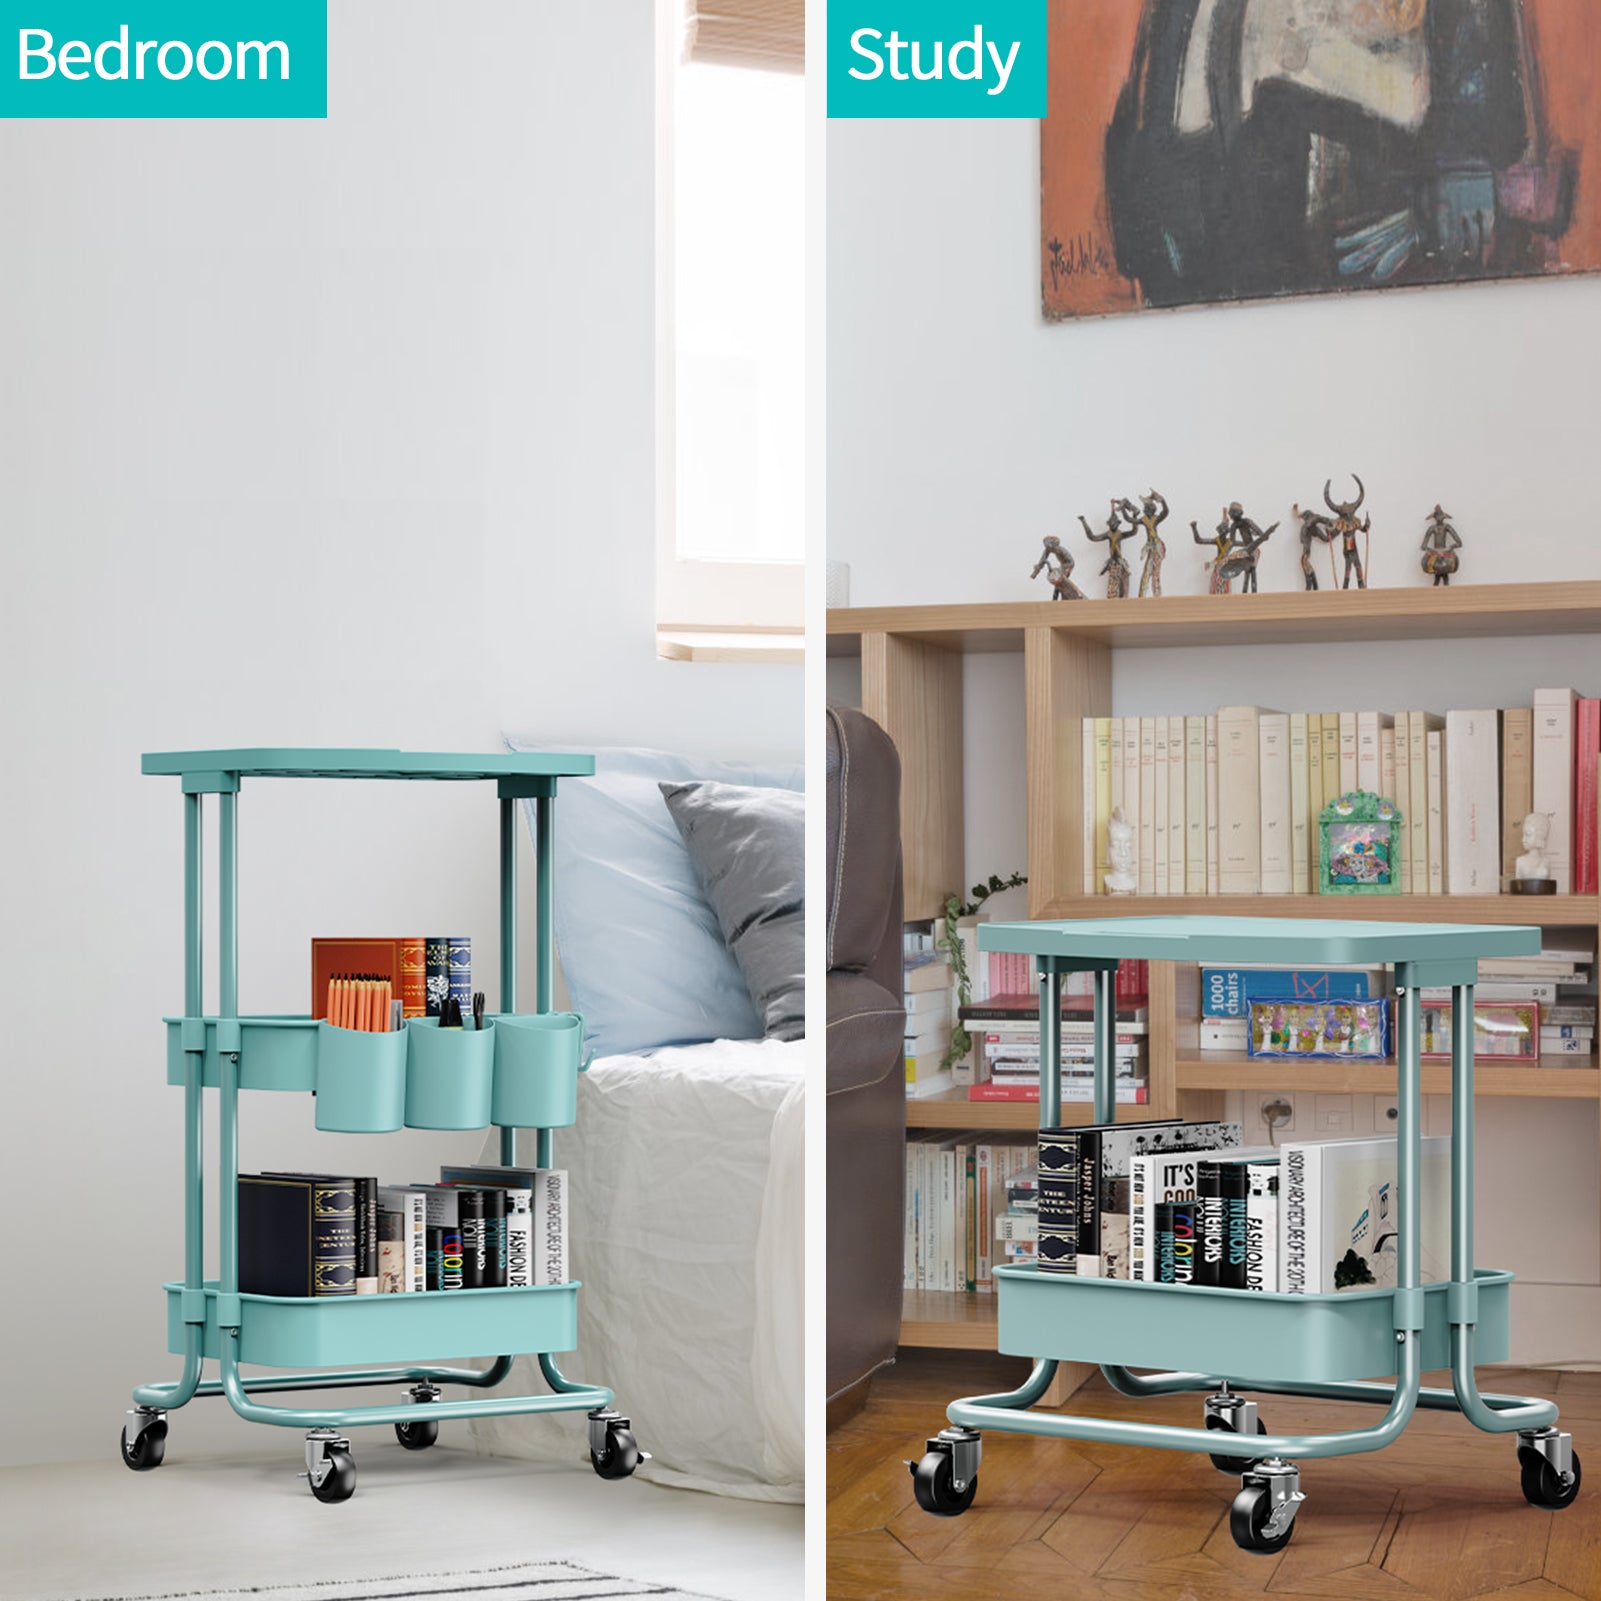 blue rolling cart in the bedroom or study room